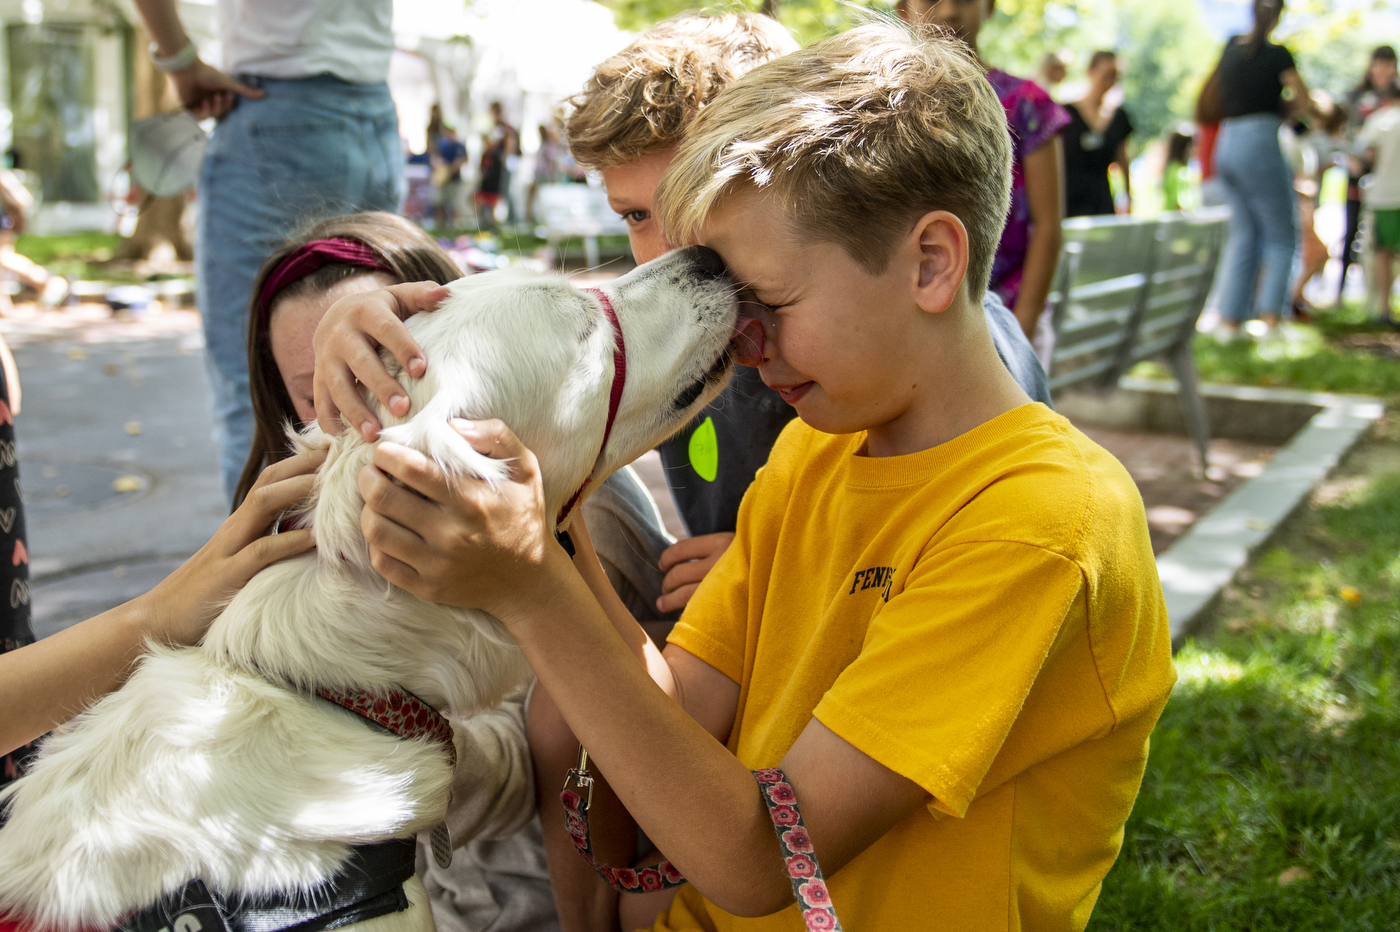 Friendly dog licking a child's face